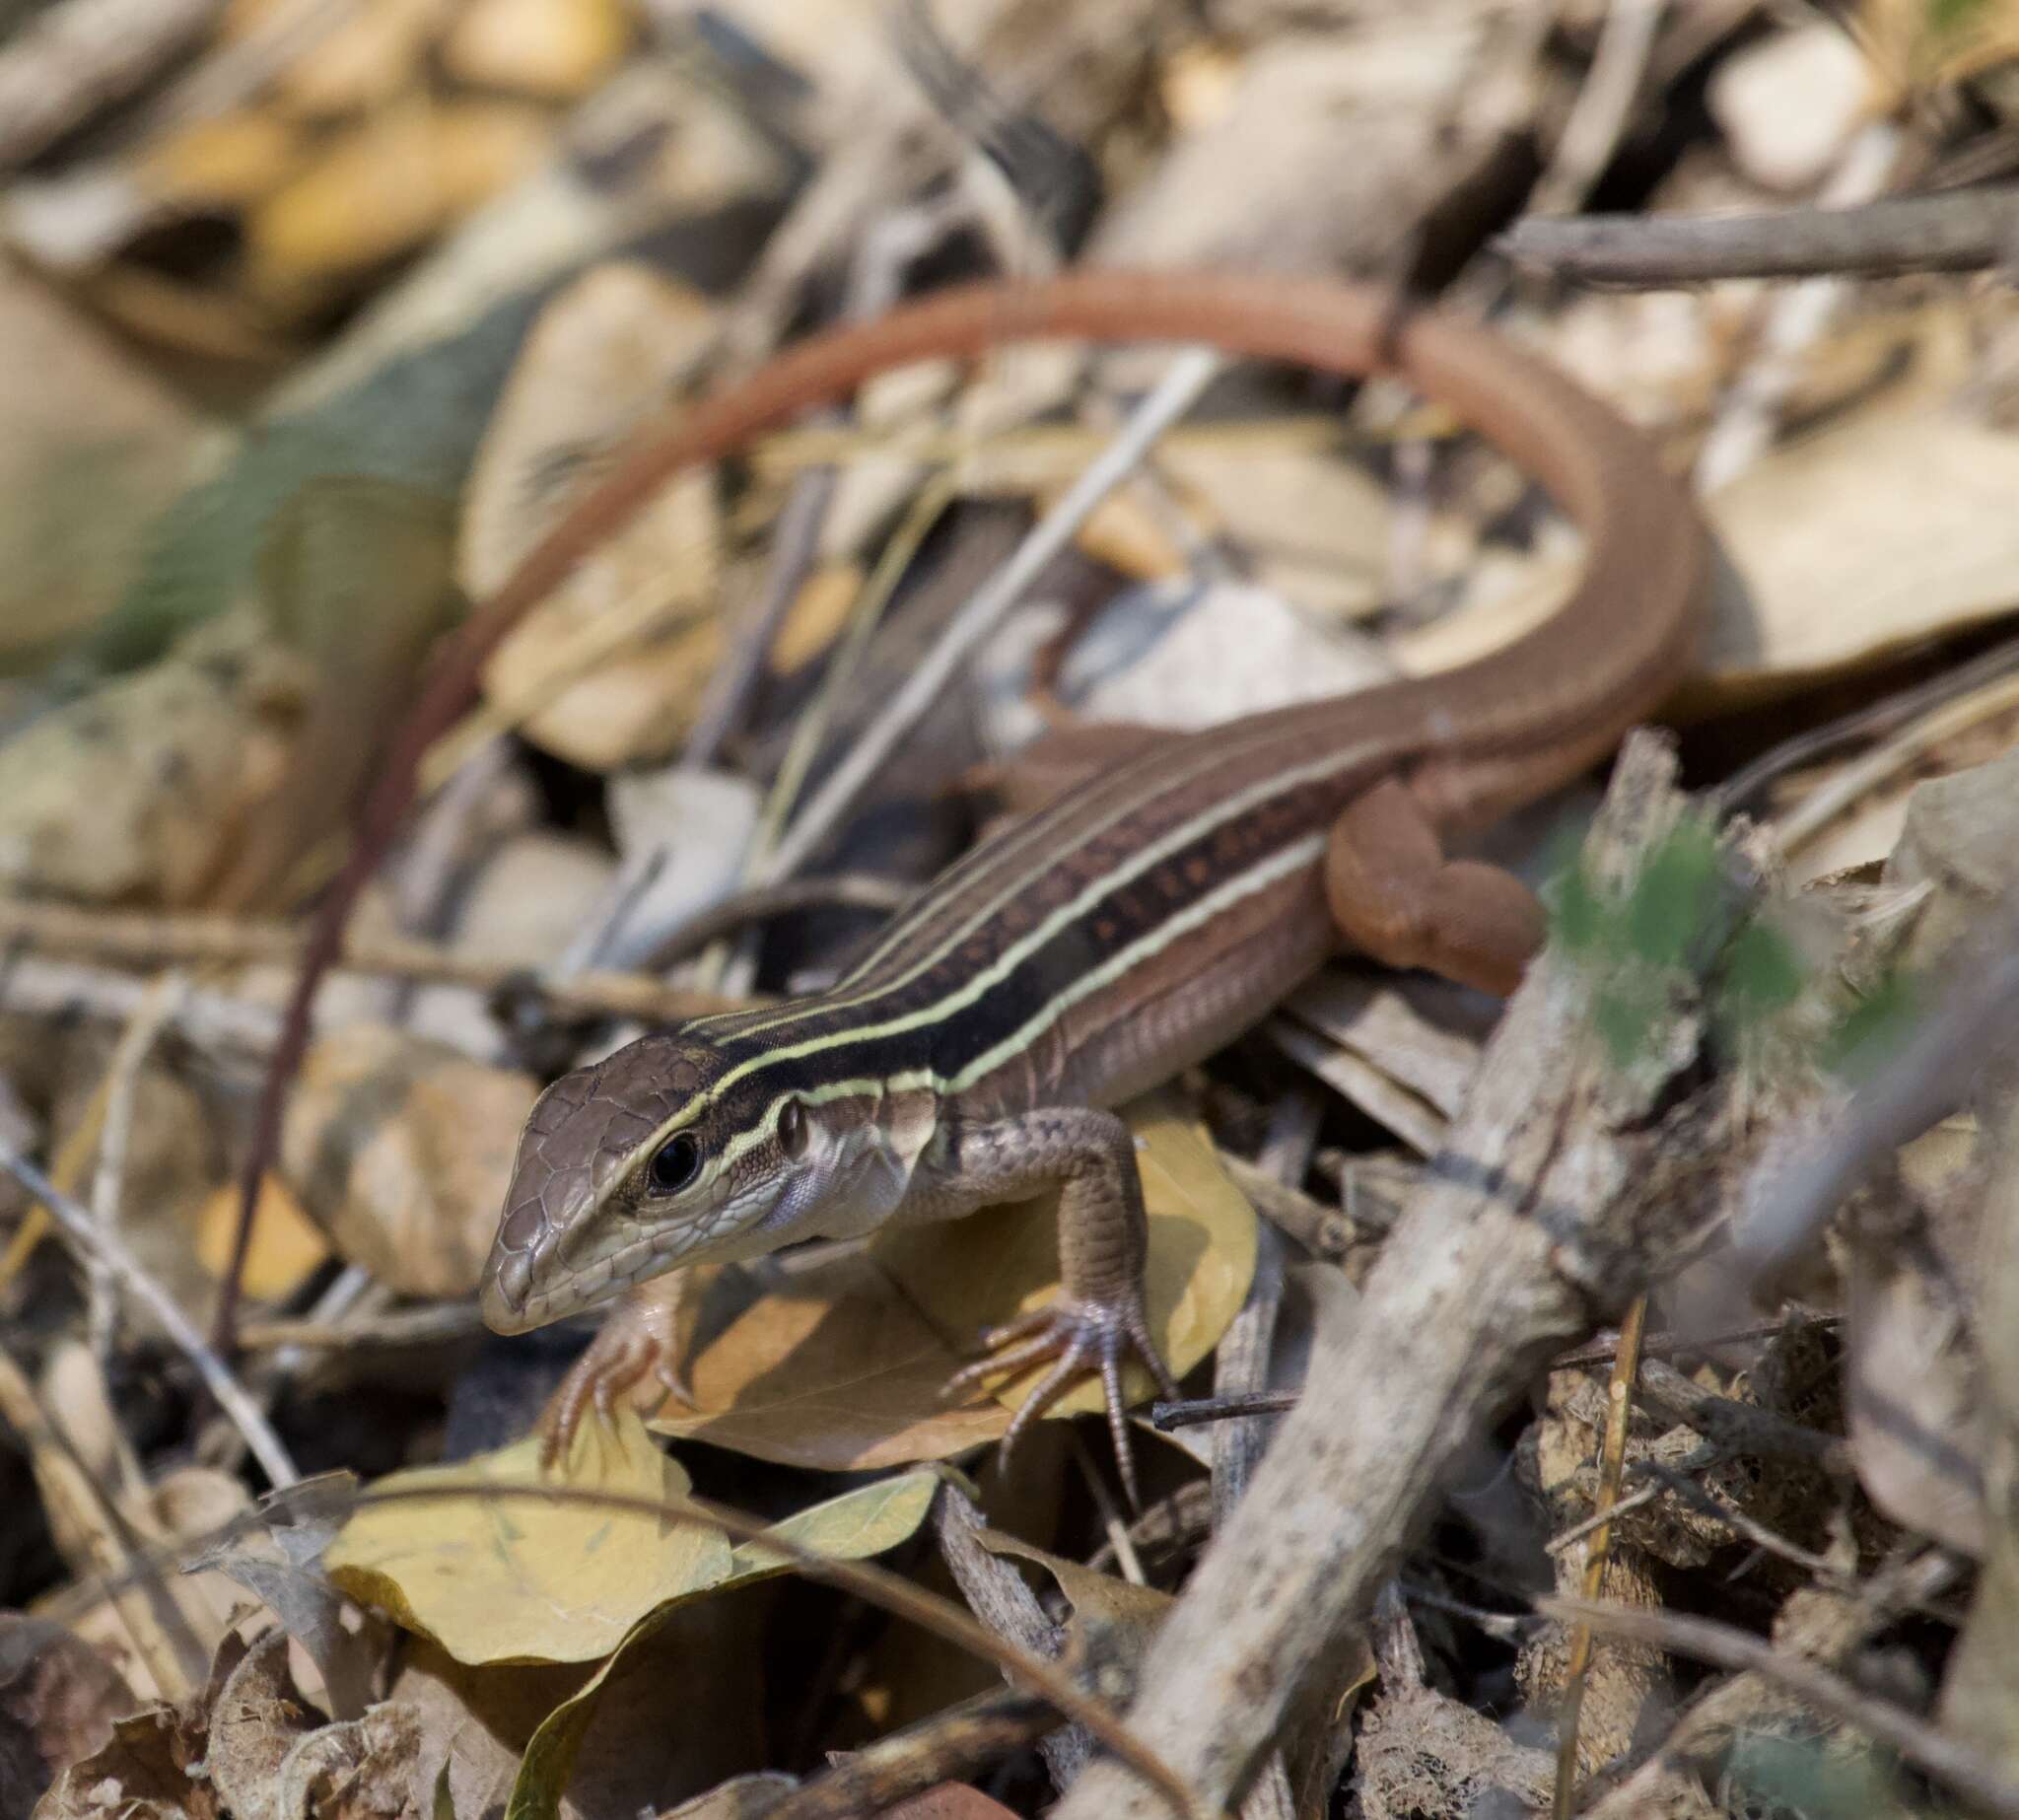 Image of Colima Giant Whiptail